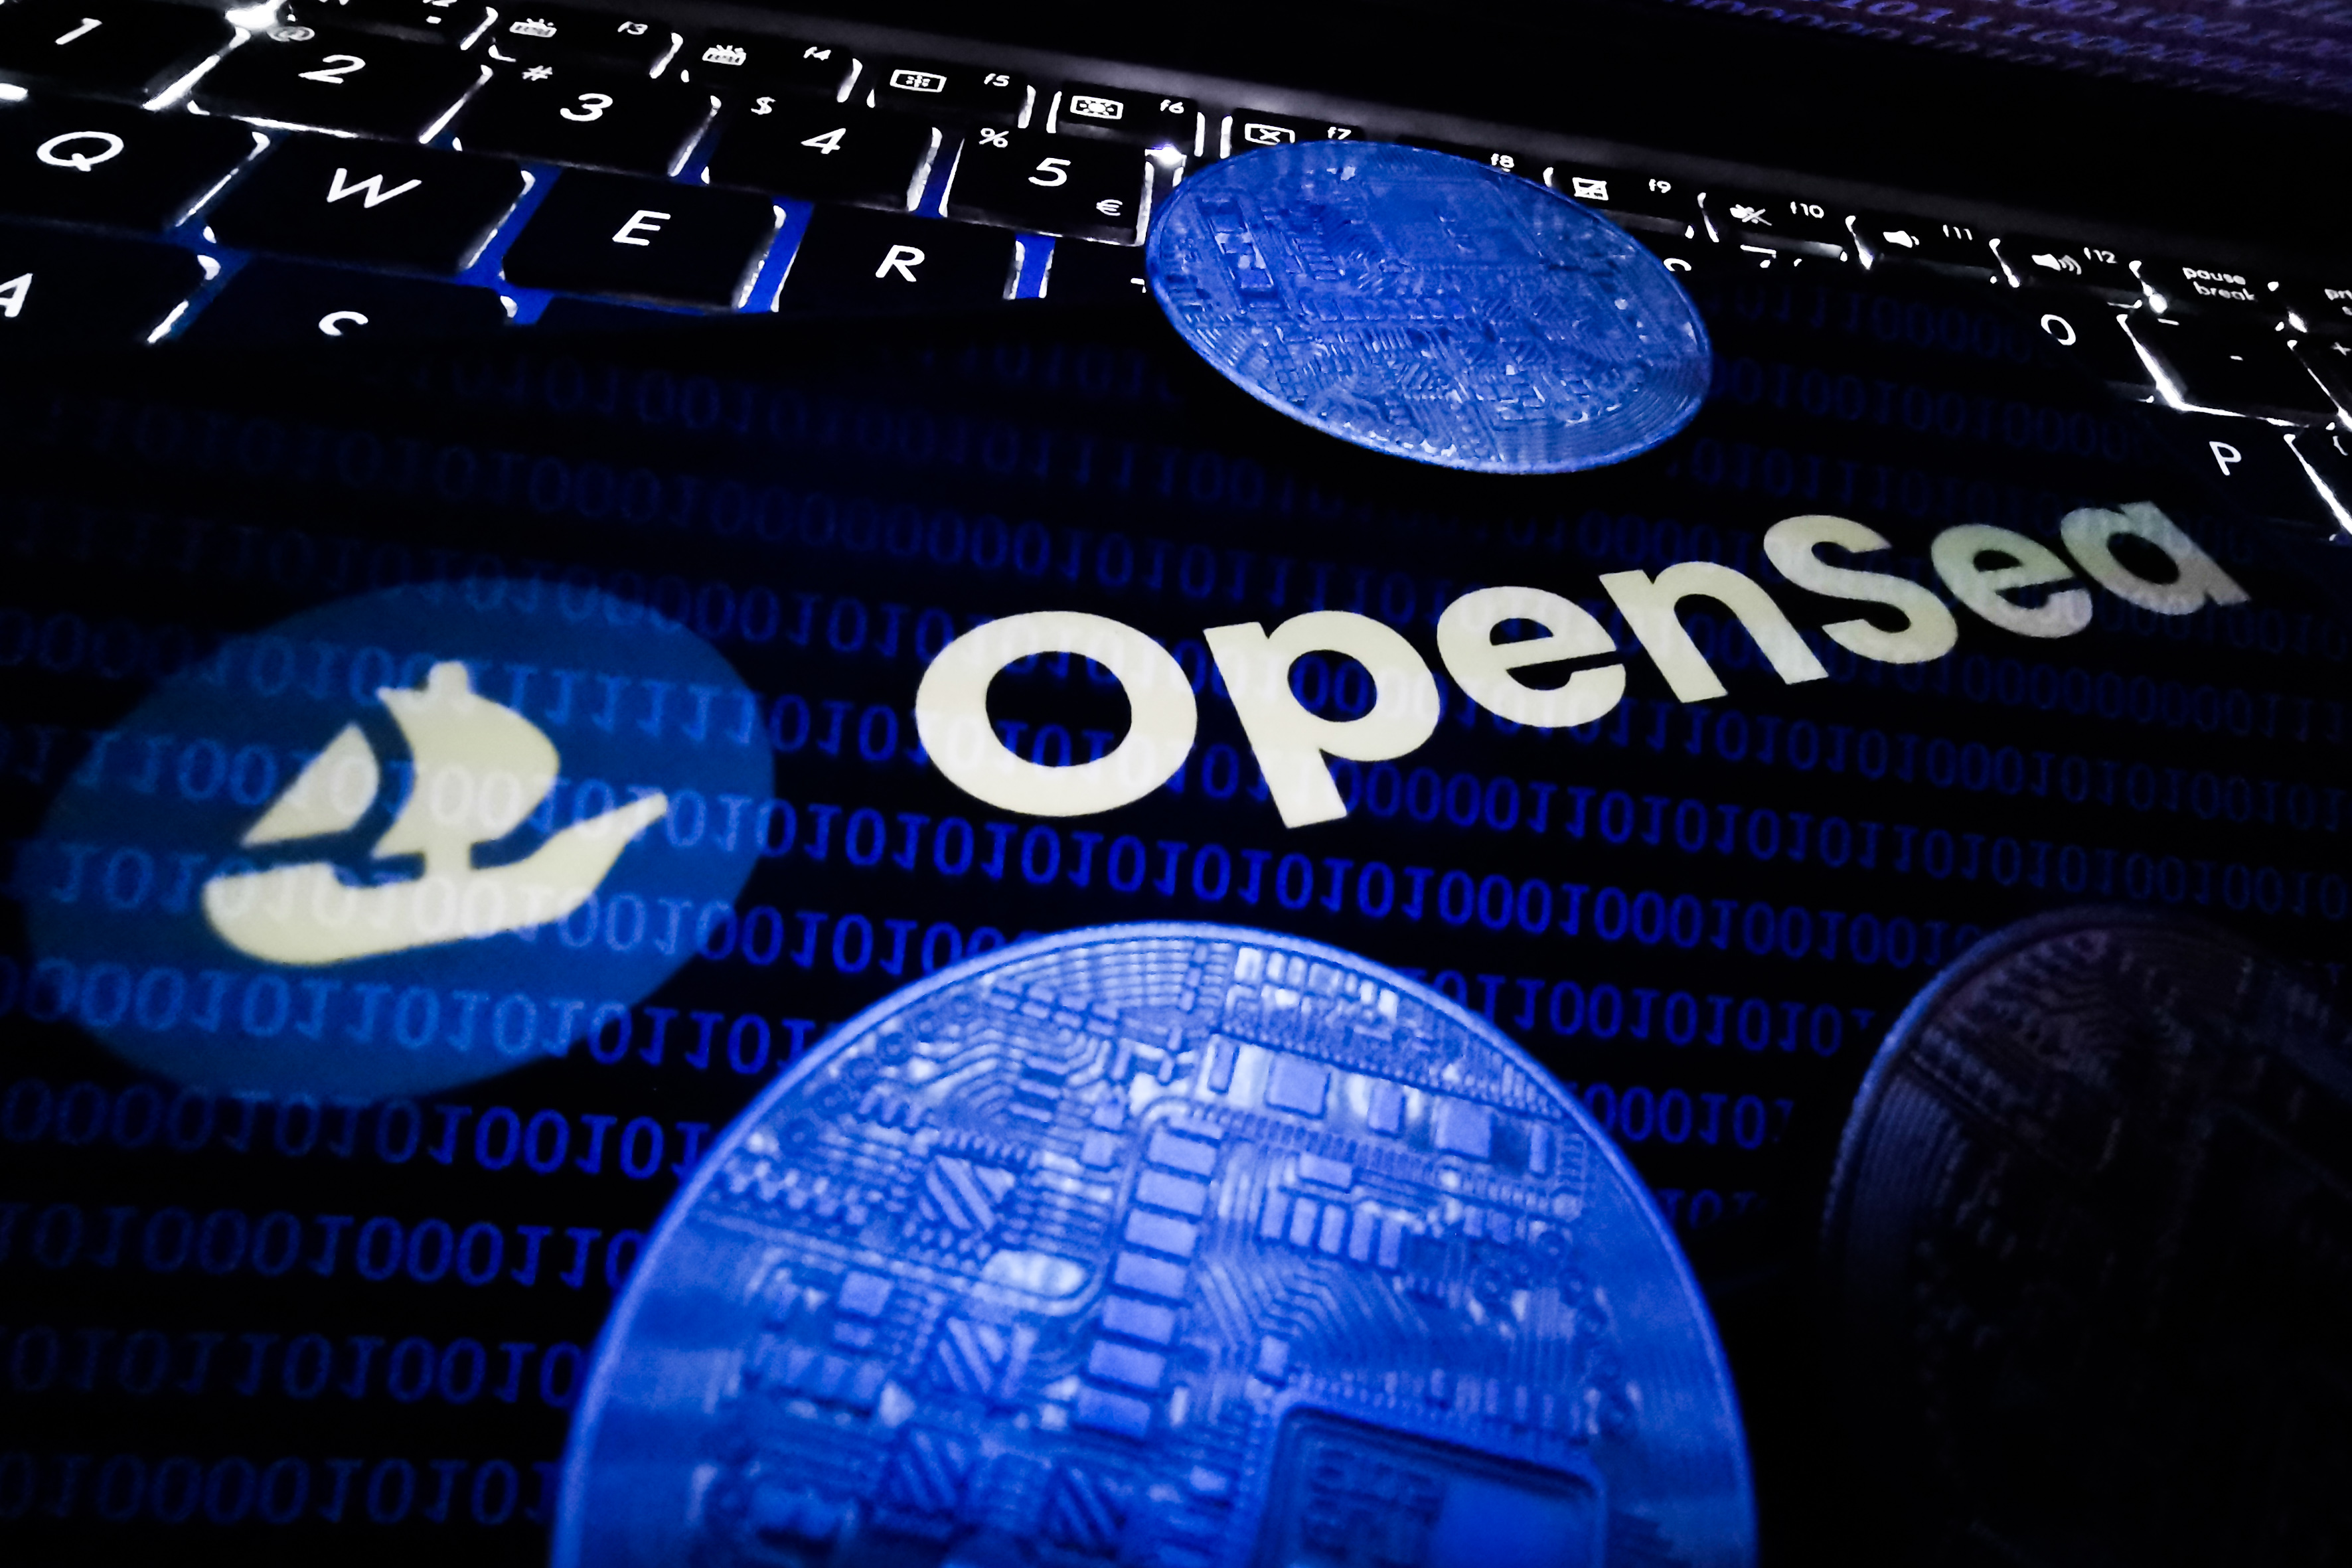 Security flaws at NFT marketplace OpenSea left users' crypto wallets open to attack